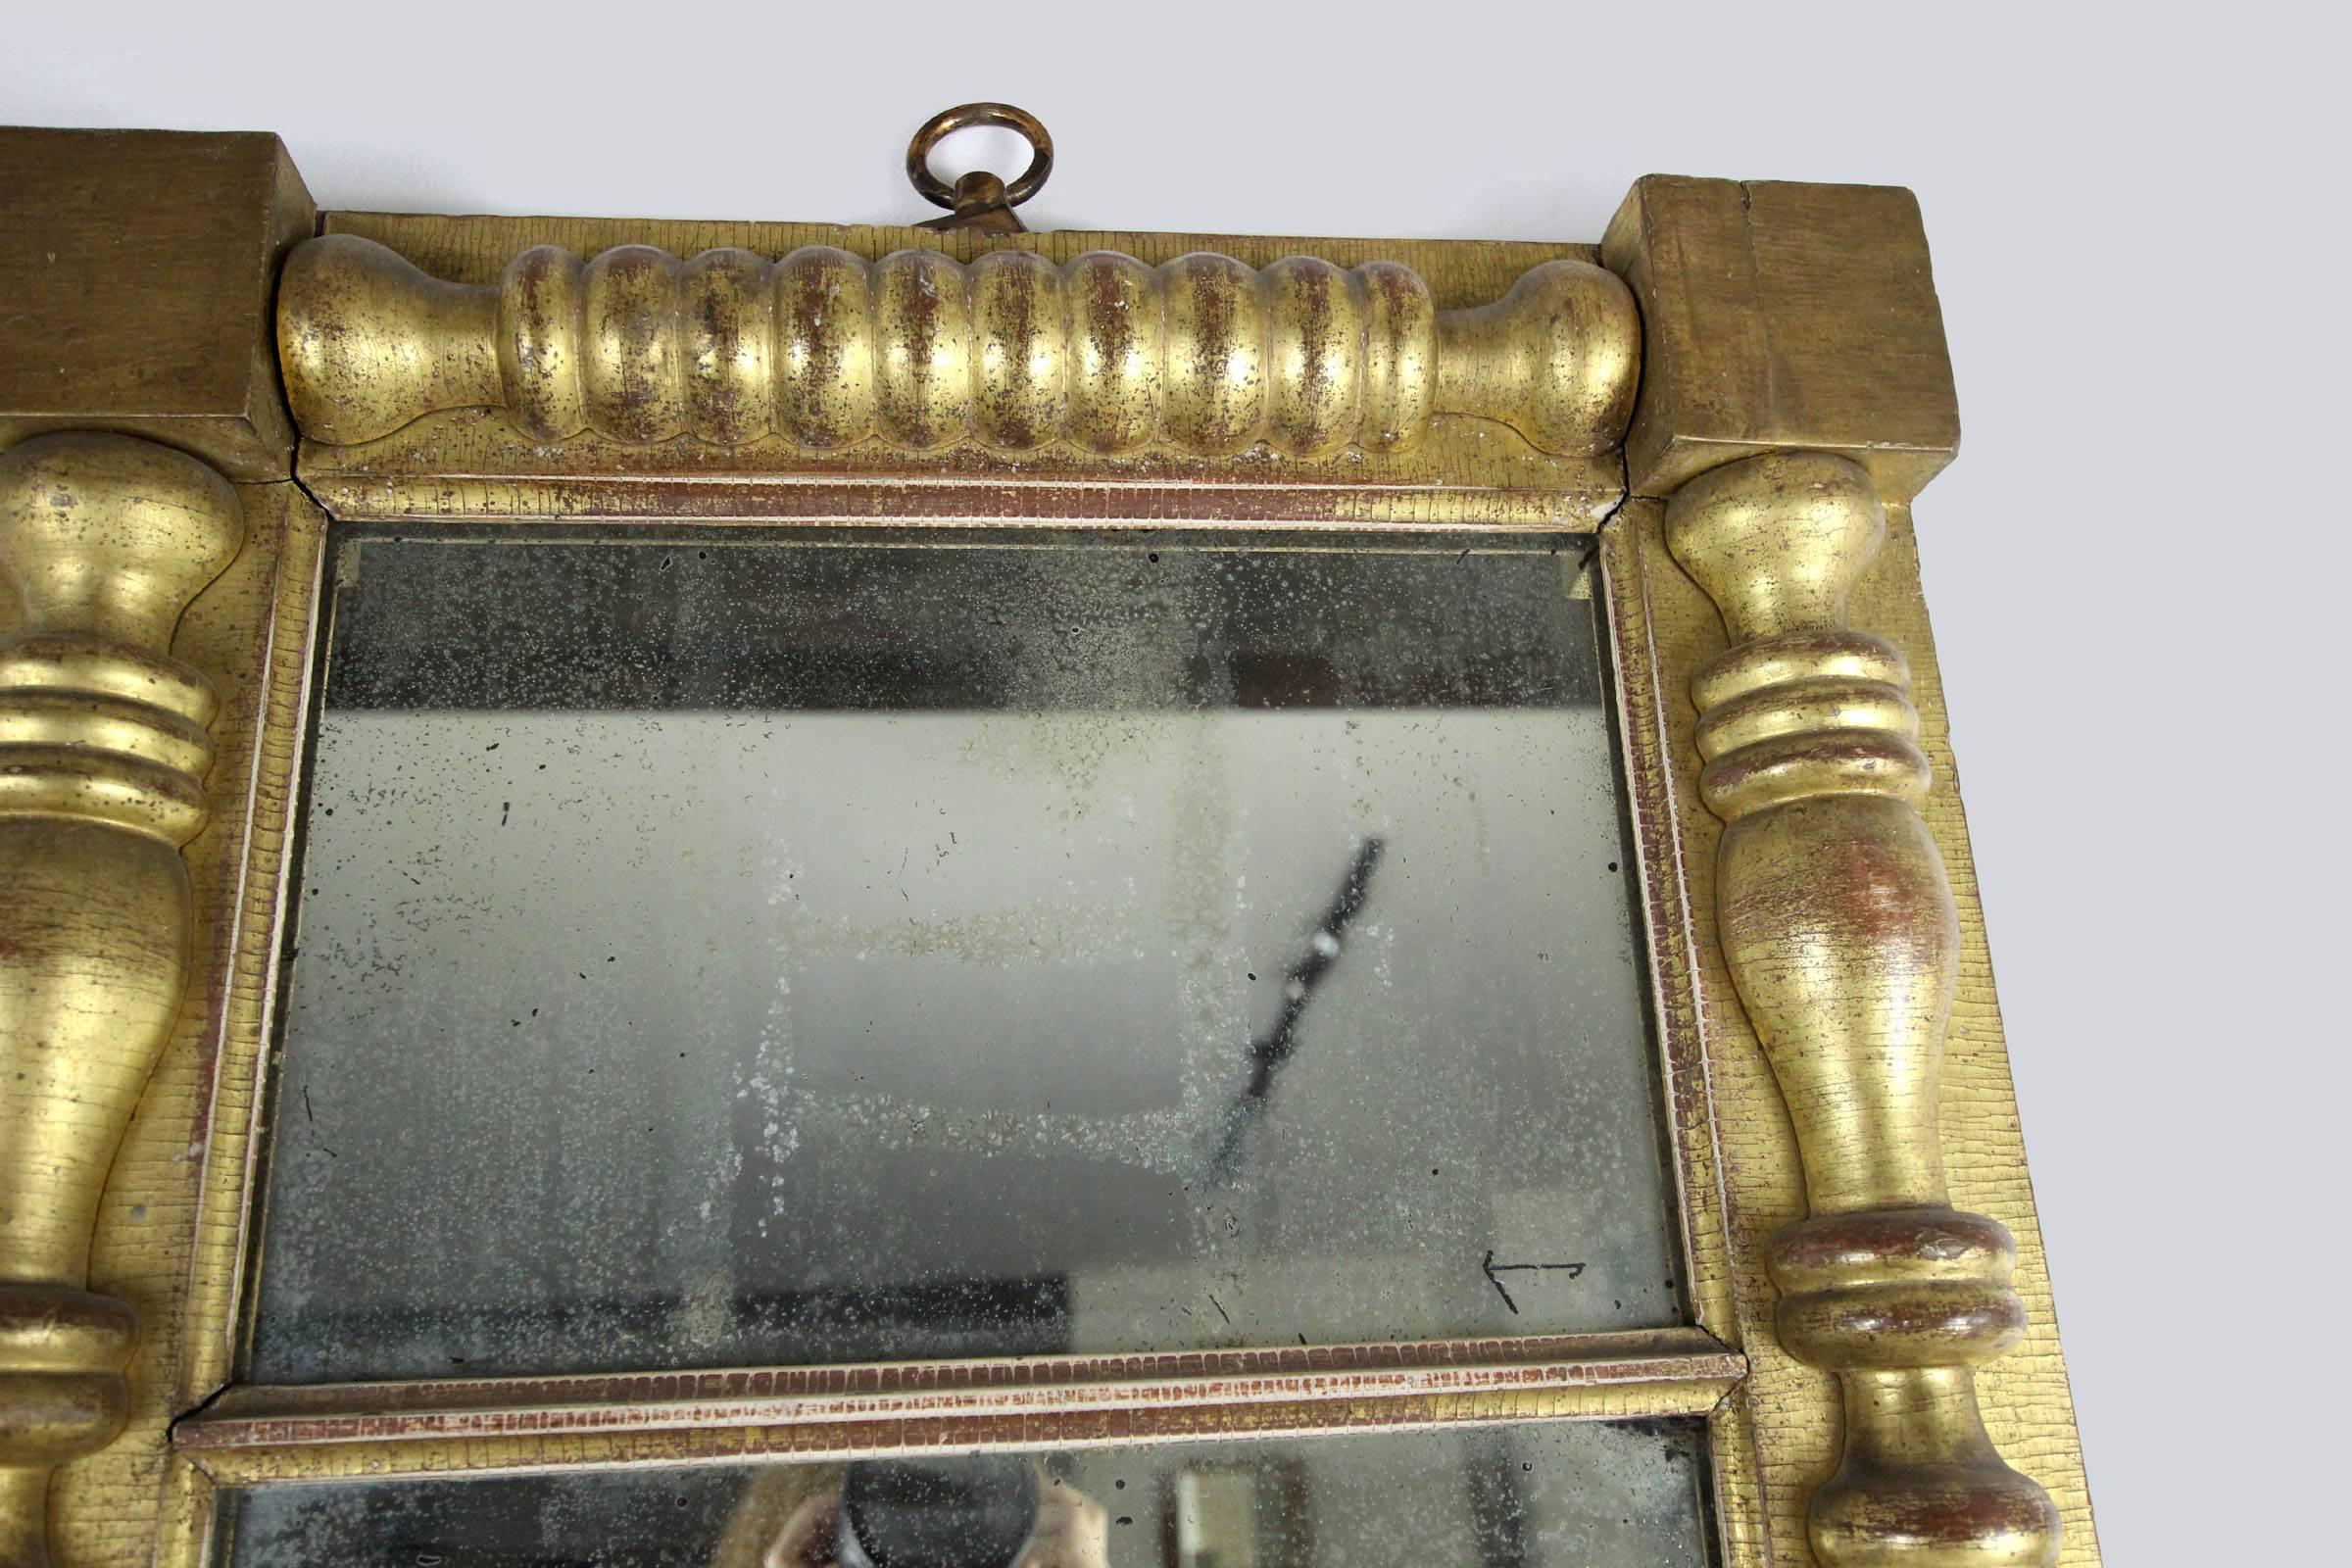 Large, excellent looking glass in heavy, gold leaf half-spindle and corner block frame, original mirror. Very good strong lines. Mirror is wonderfully crazed but still highly reflective, Philadelphia, circa 1825.